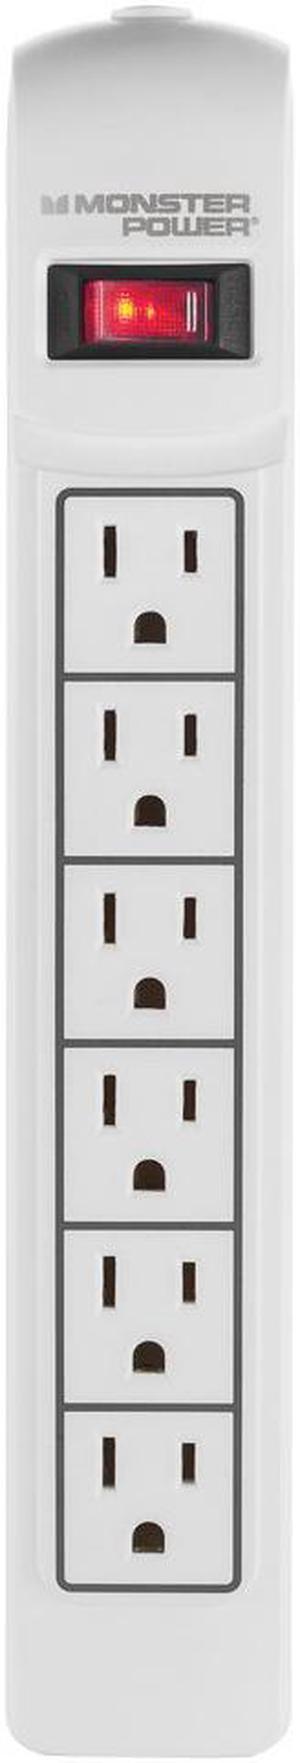 Monster Cable Essentials 600 6 Outlet Surge Protector (White)